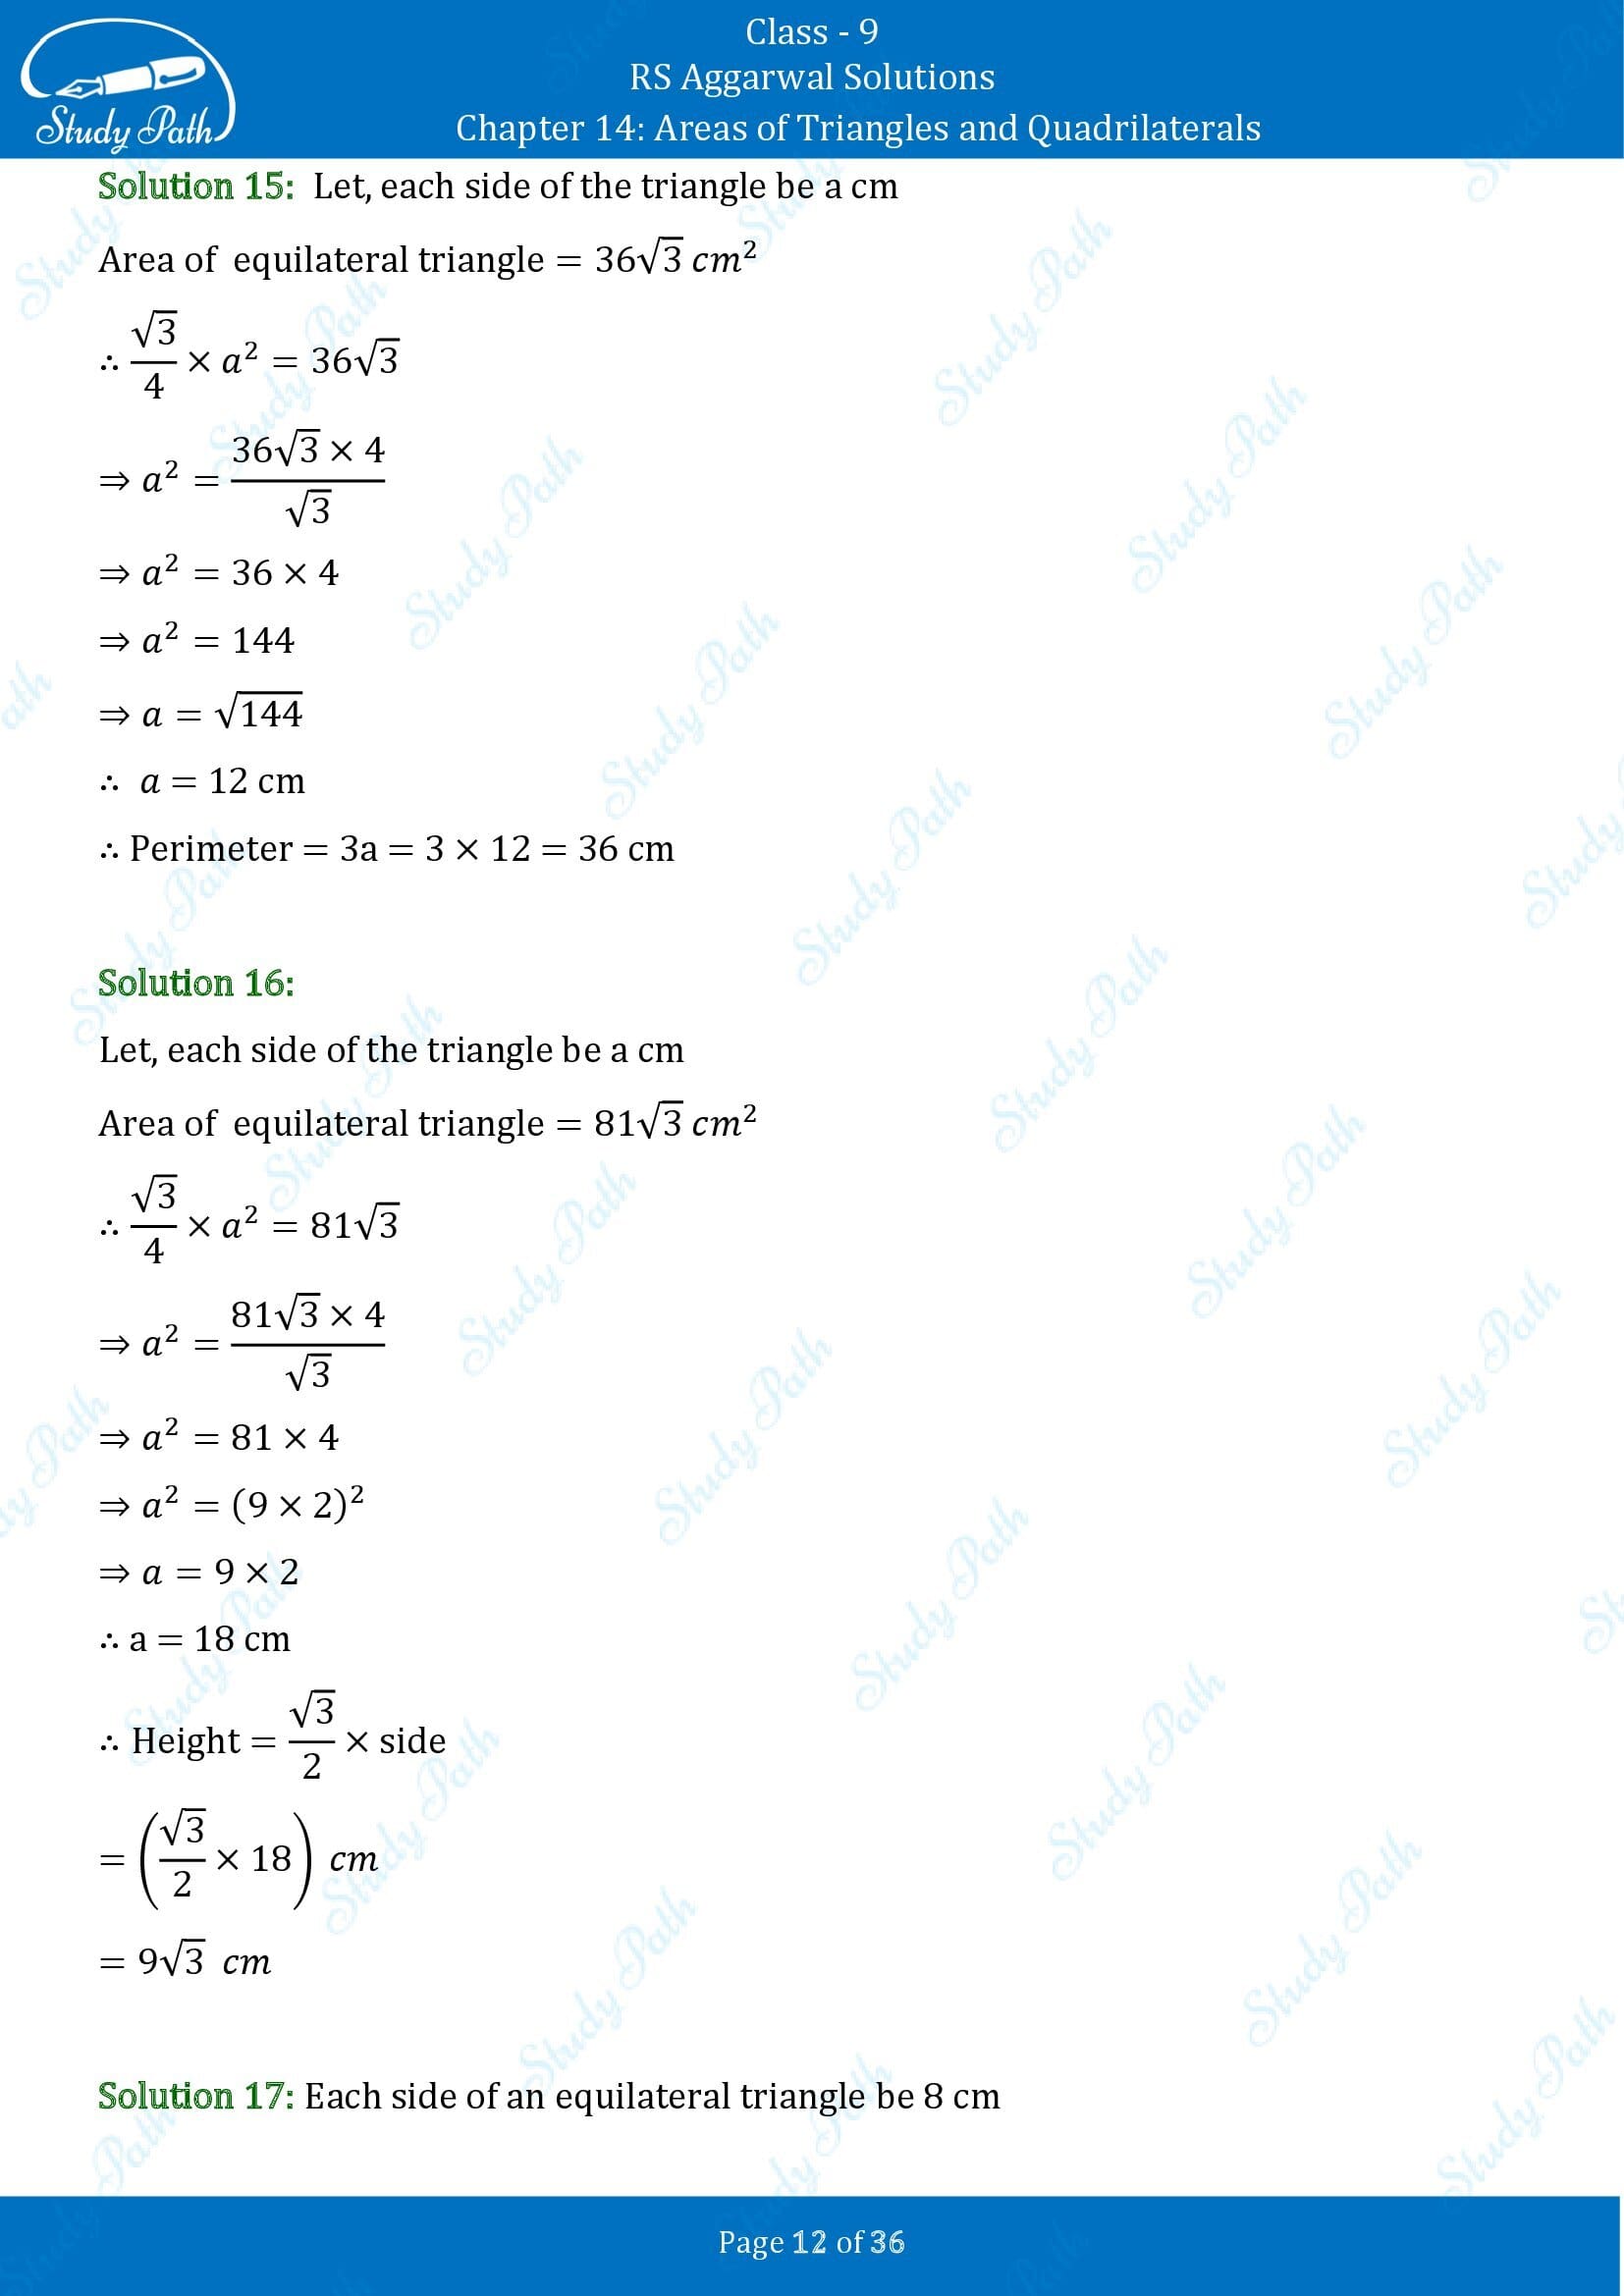 RS Aggarwal Solutions Class 9 Chapter 14 Areas of Triangles and Quadrilaterals Exercise 14 00012